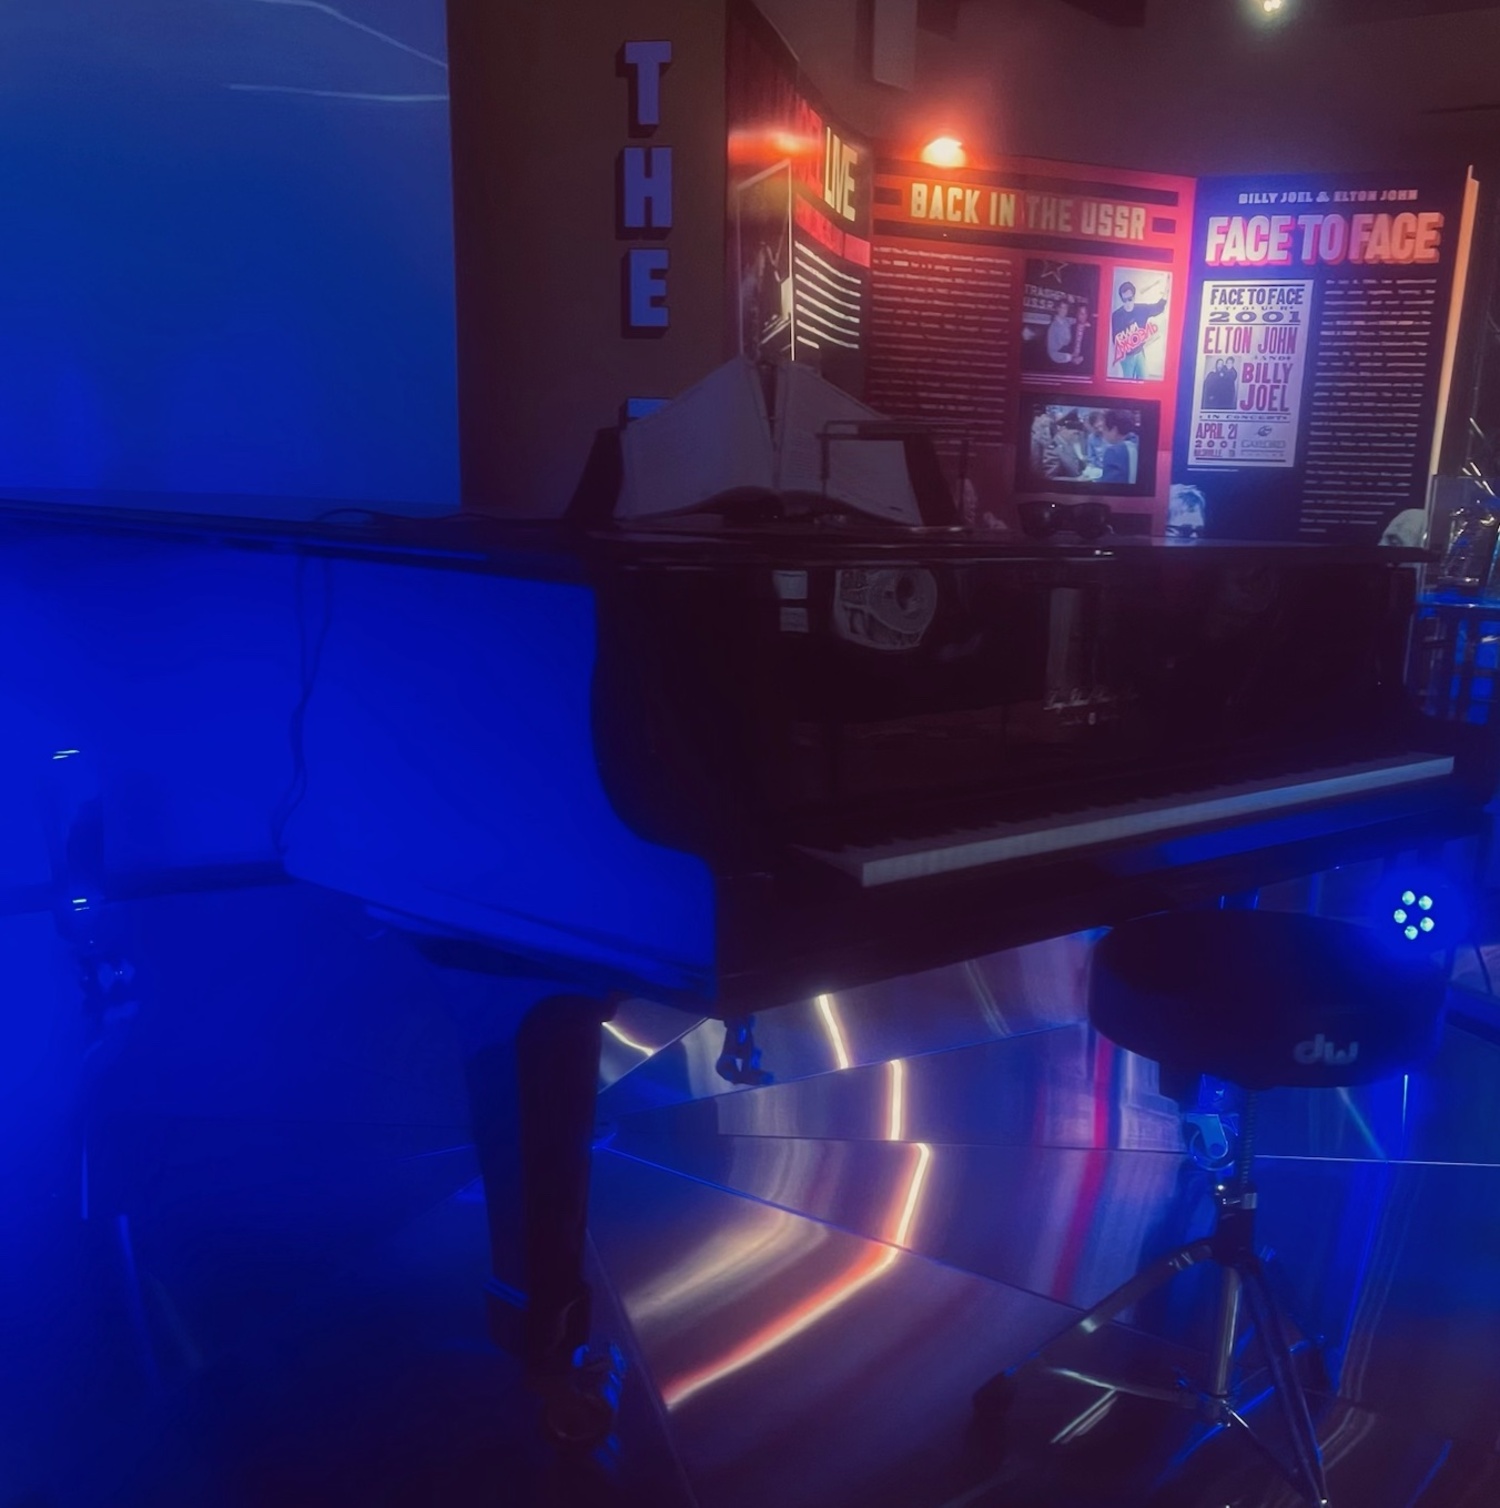 Billy Joel's piano from a concert he performed with Elton John is among the objects on view in the exhibition about his life and career at the Long Island Music & Entertainment Hall of Fame in Stony Brook. LEAH CHIAPPINO